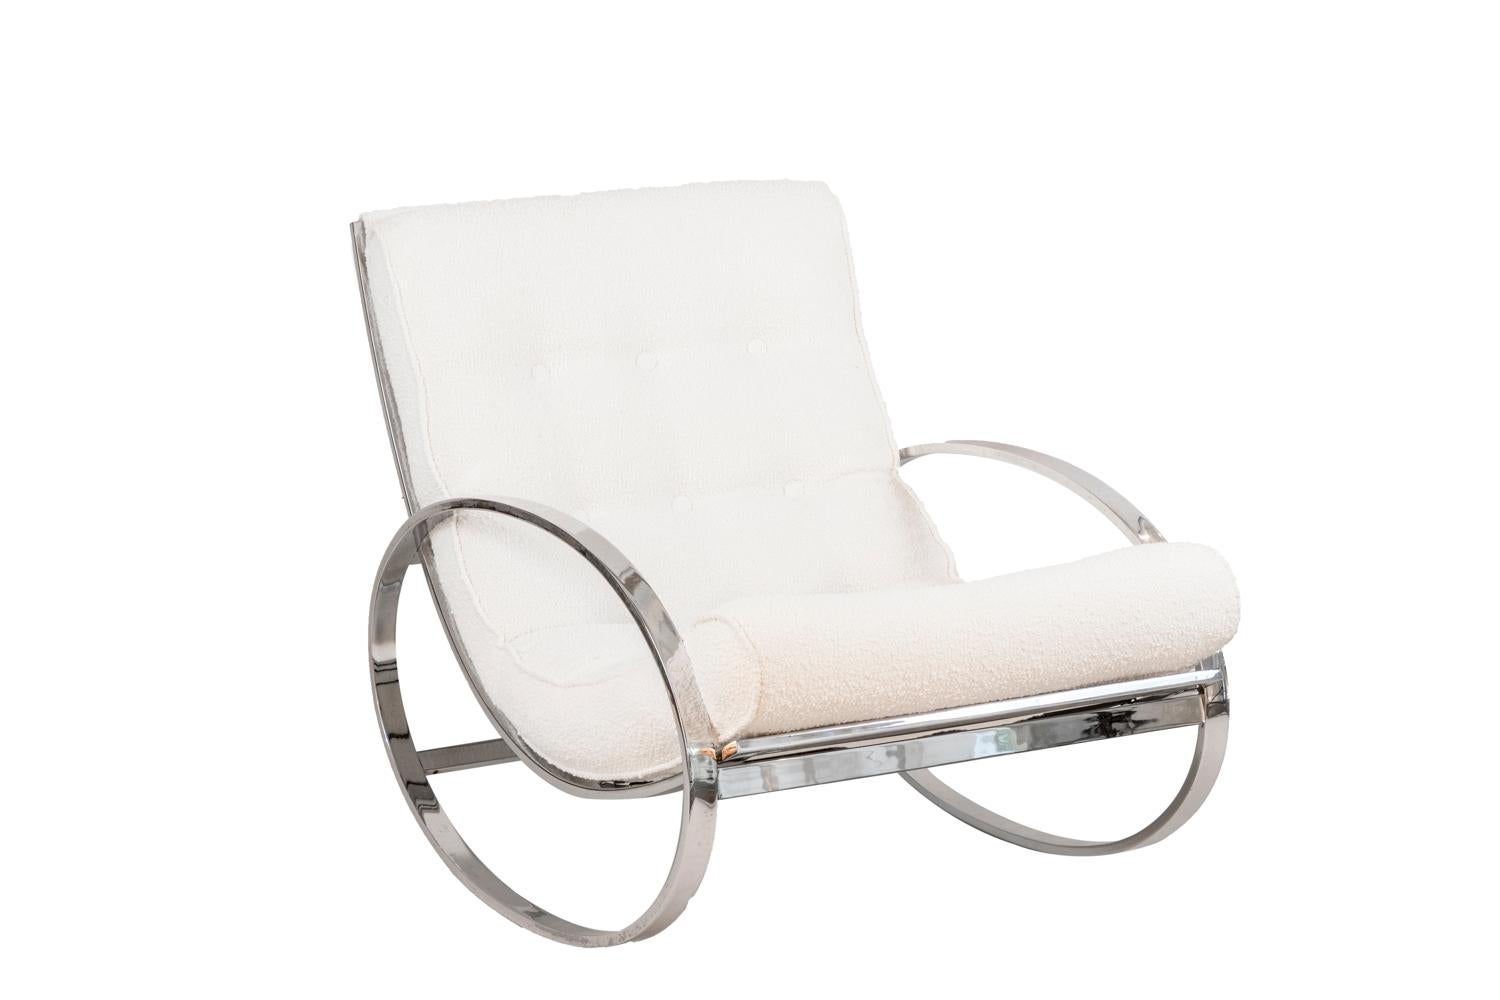 Renato Zevi, attributed to.
Pair of Ellipse rocking-chairs in chromed metal. Rectangular shape arm in oval shape. Seat and back with a bronze structure of transversal bars supporting a quilted cushion attached to the metal structure top by snap